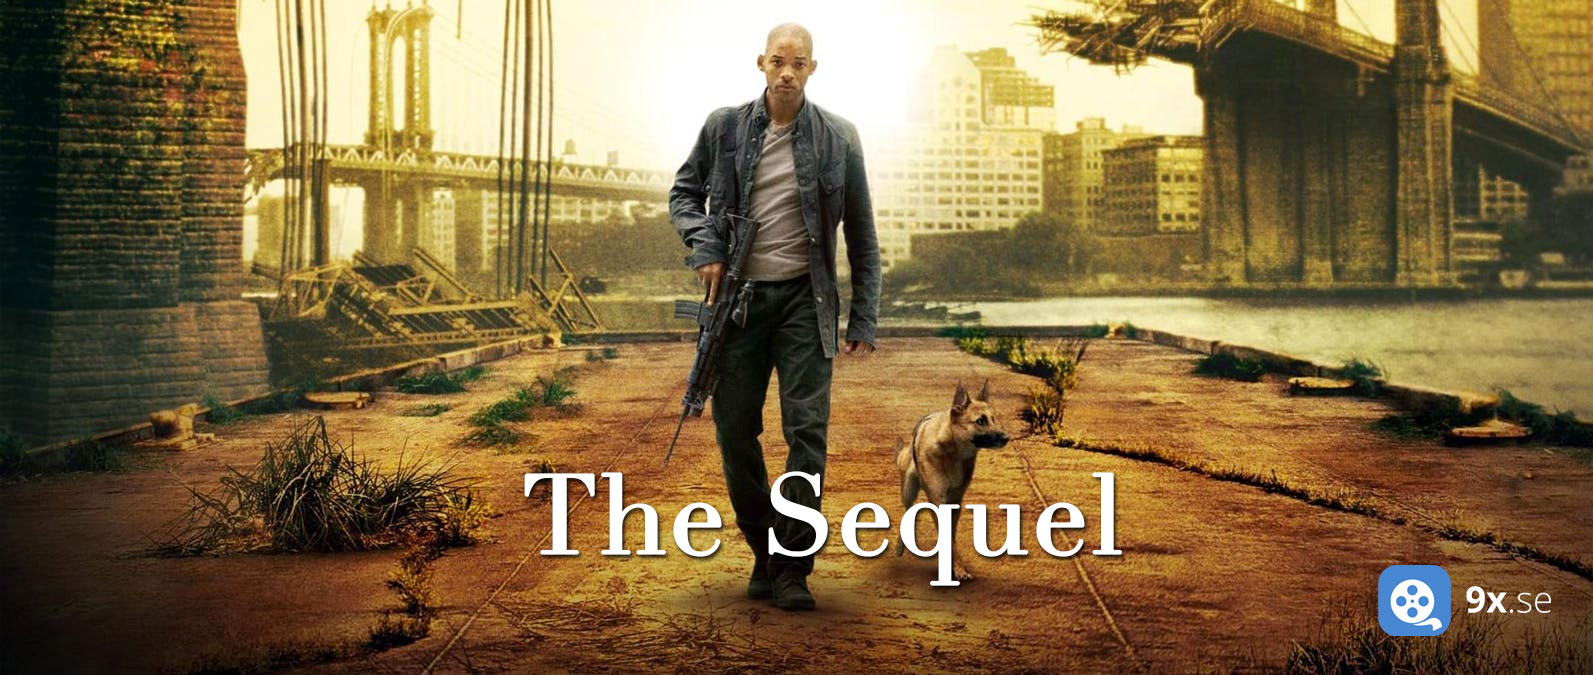 Will Smith and Michael B. Jordan will star in a sequel to 'I Am Legend'